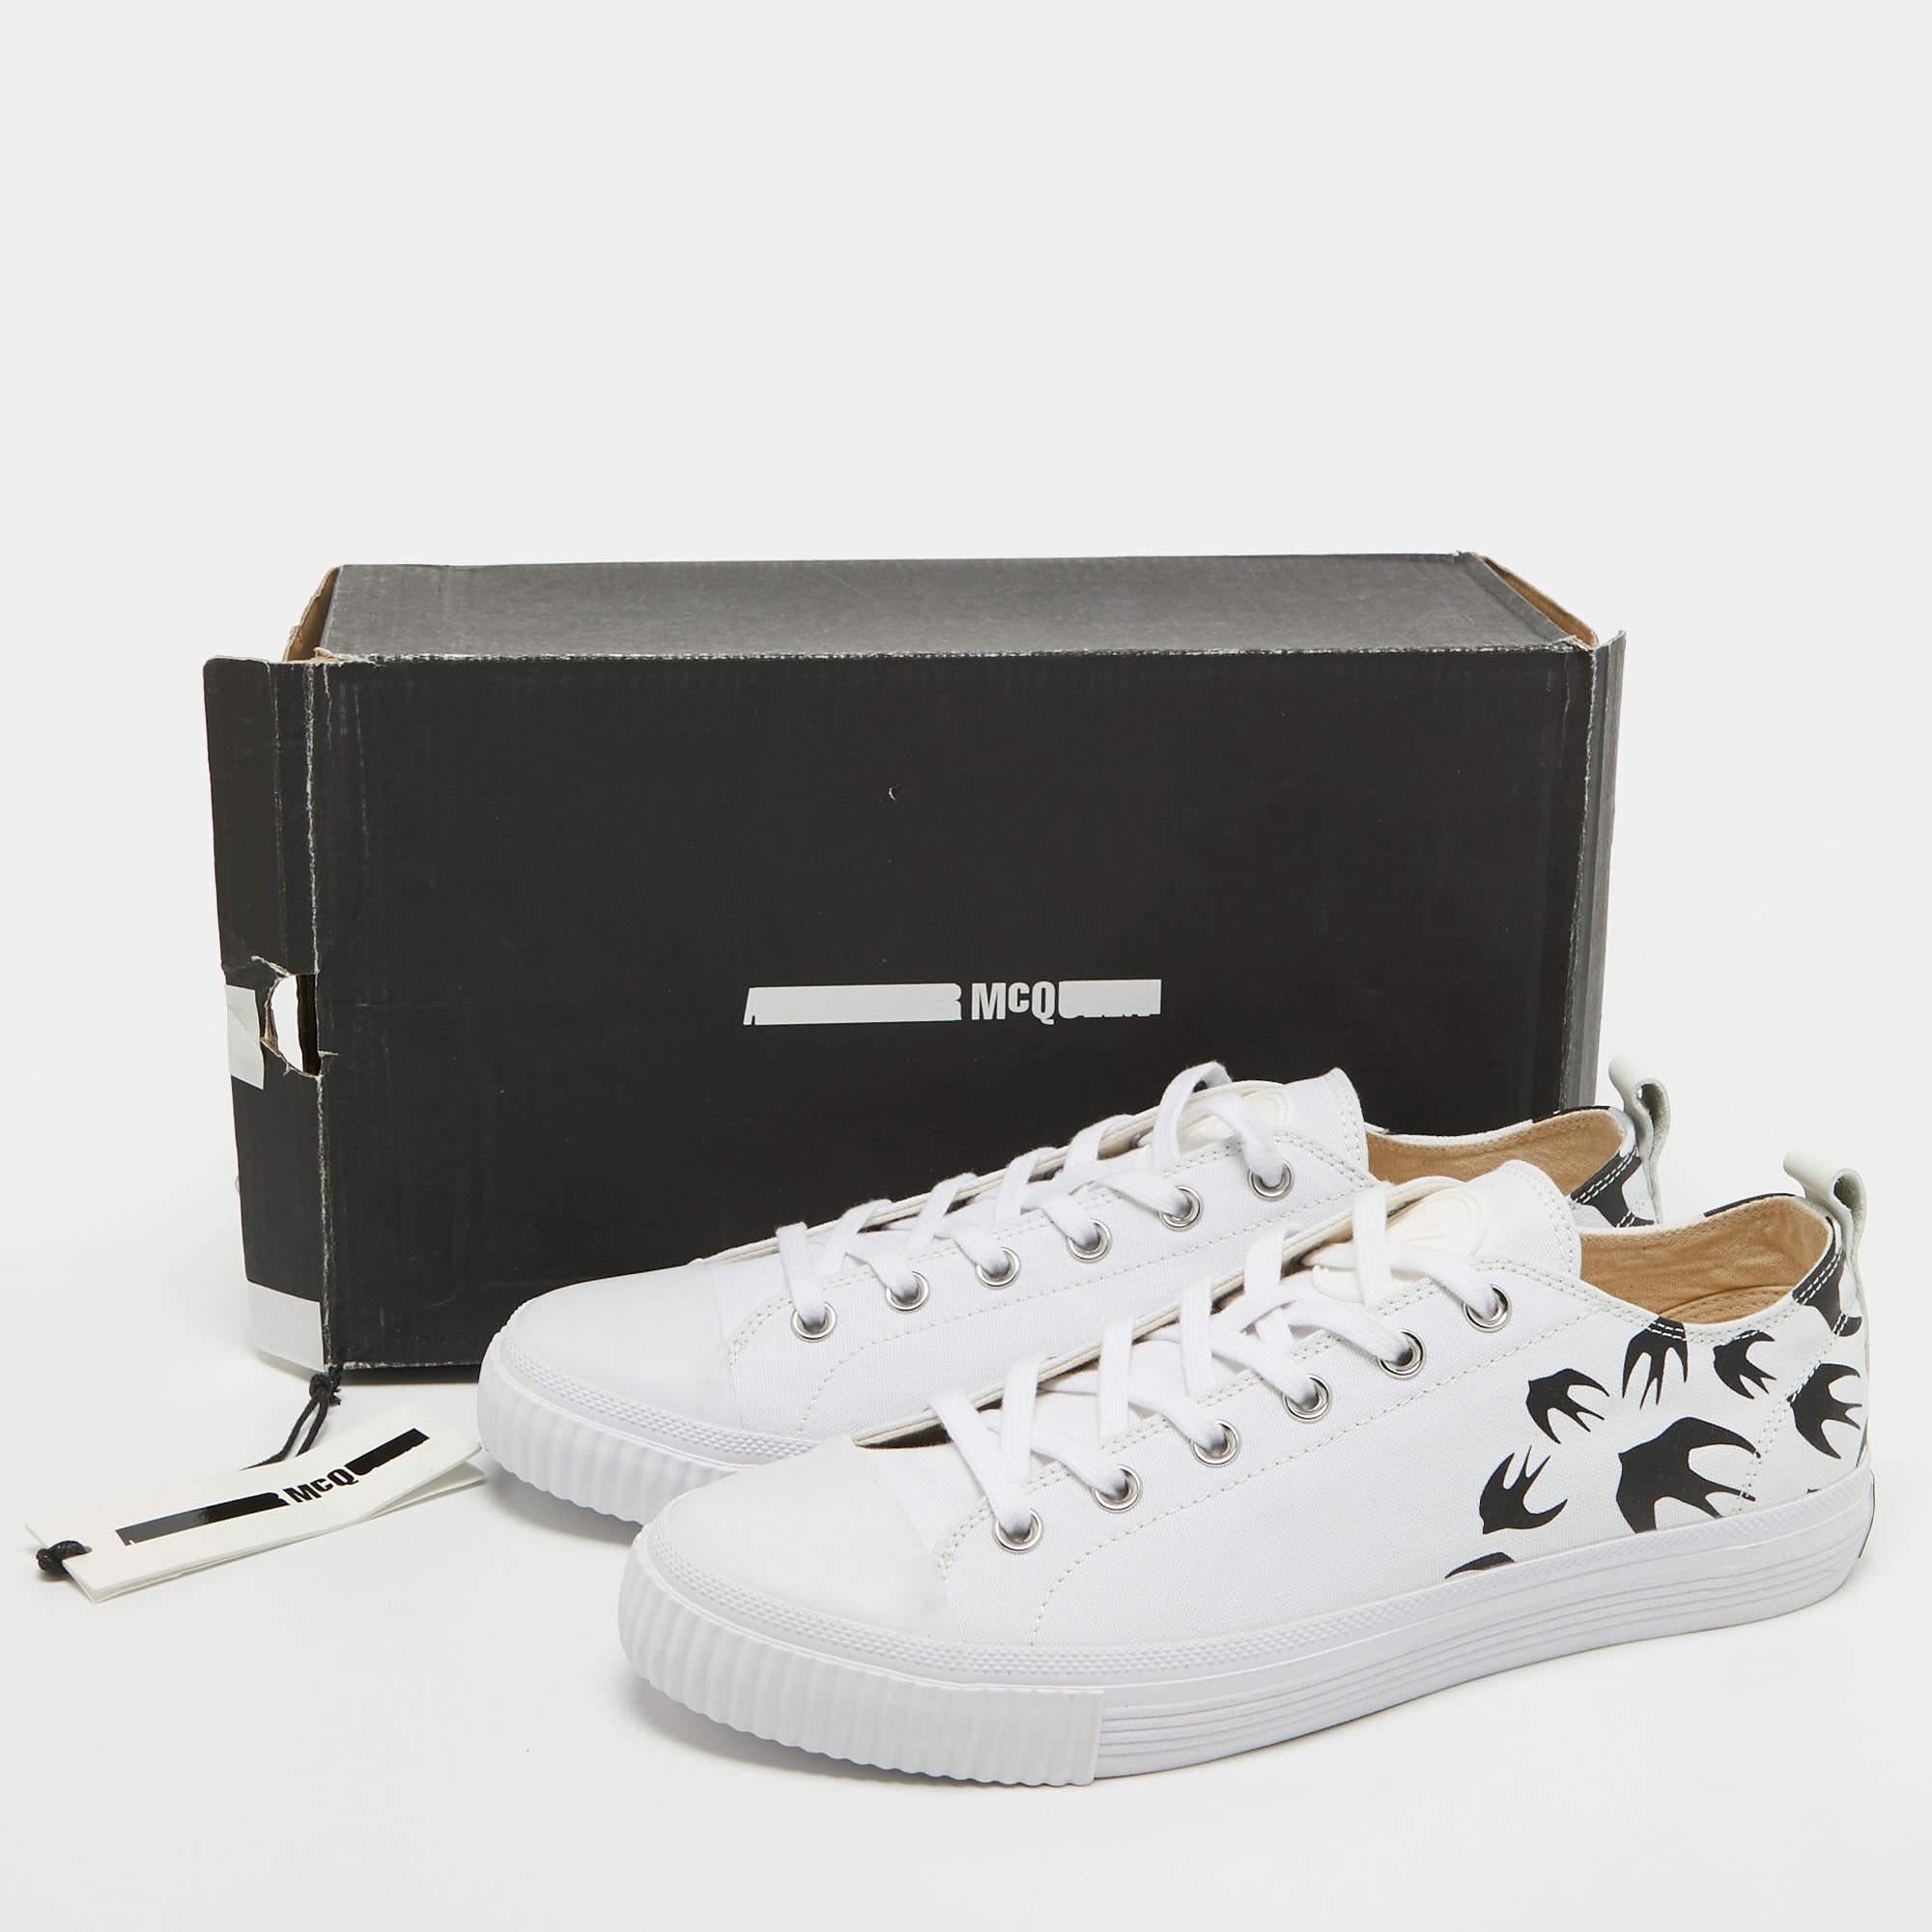 McQ by Alexander McQueen White Canvas Swallow Sneakers Size 44 4